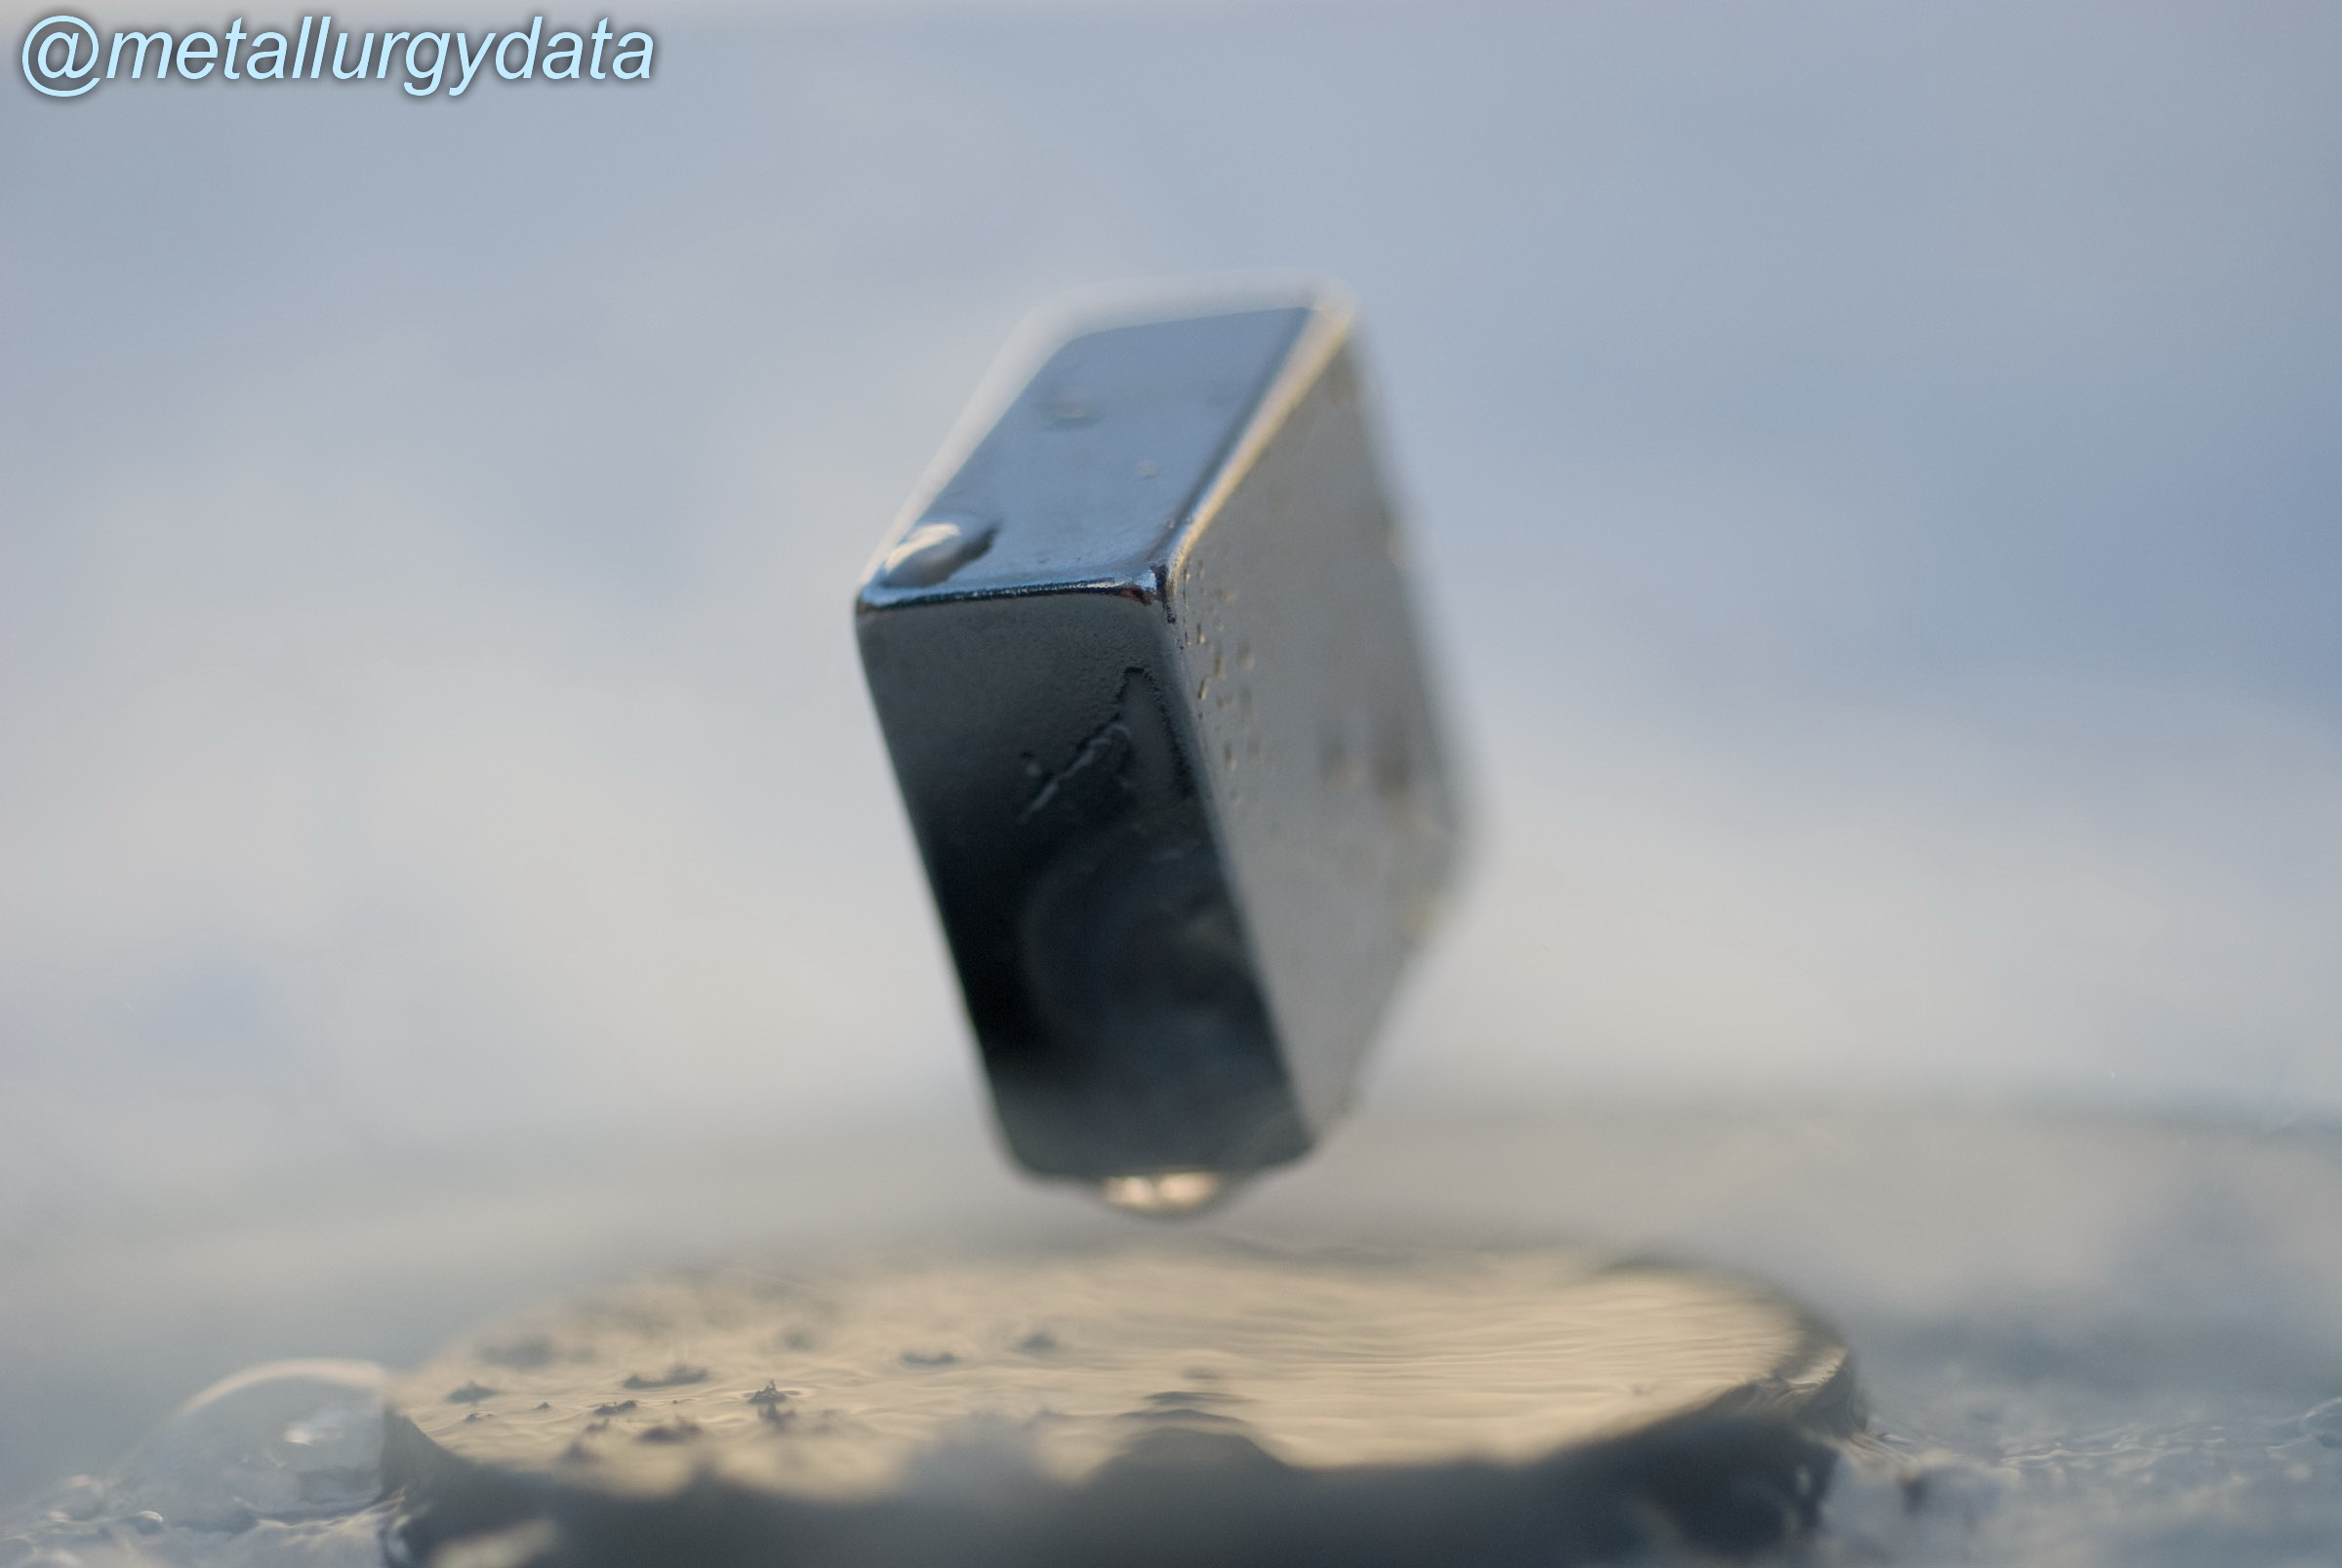 http://s4.picofile.com/file/8287667526/levitation_of_a_magnet_on_top_of_a_superconductor_of_cuprate_type_YBa2Cu3O7_cooled_at_196_C.jpg